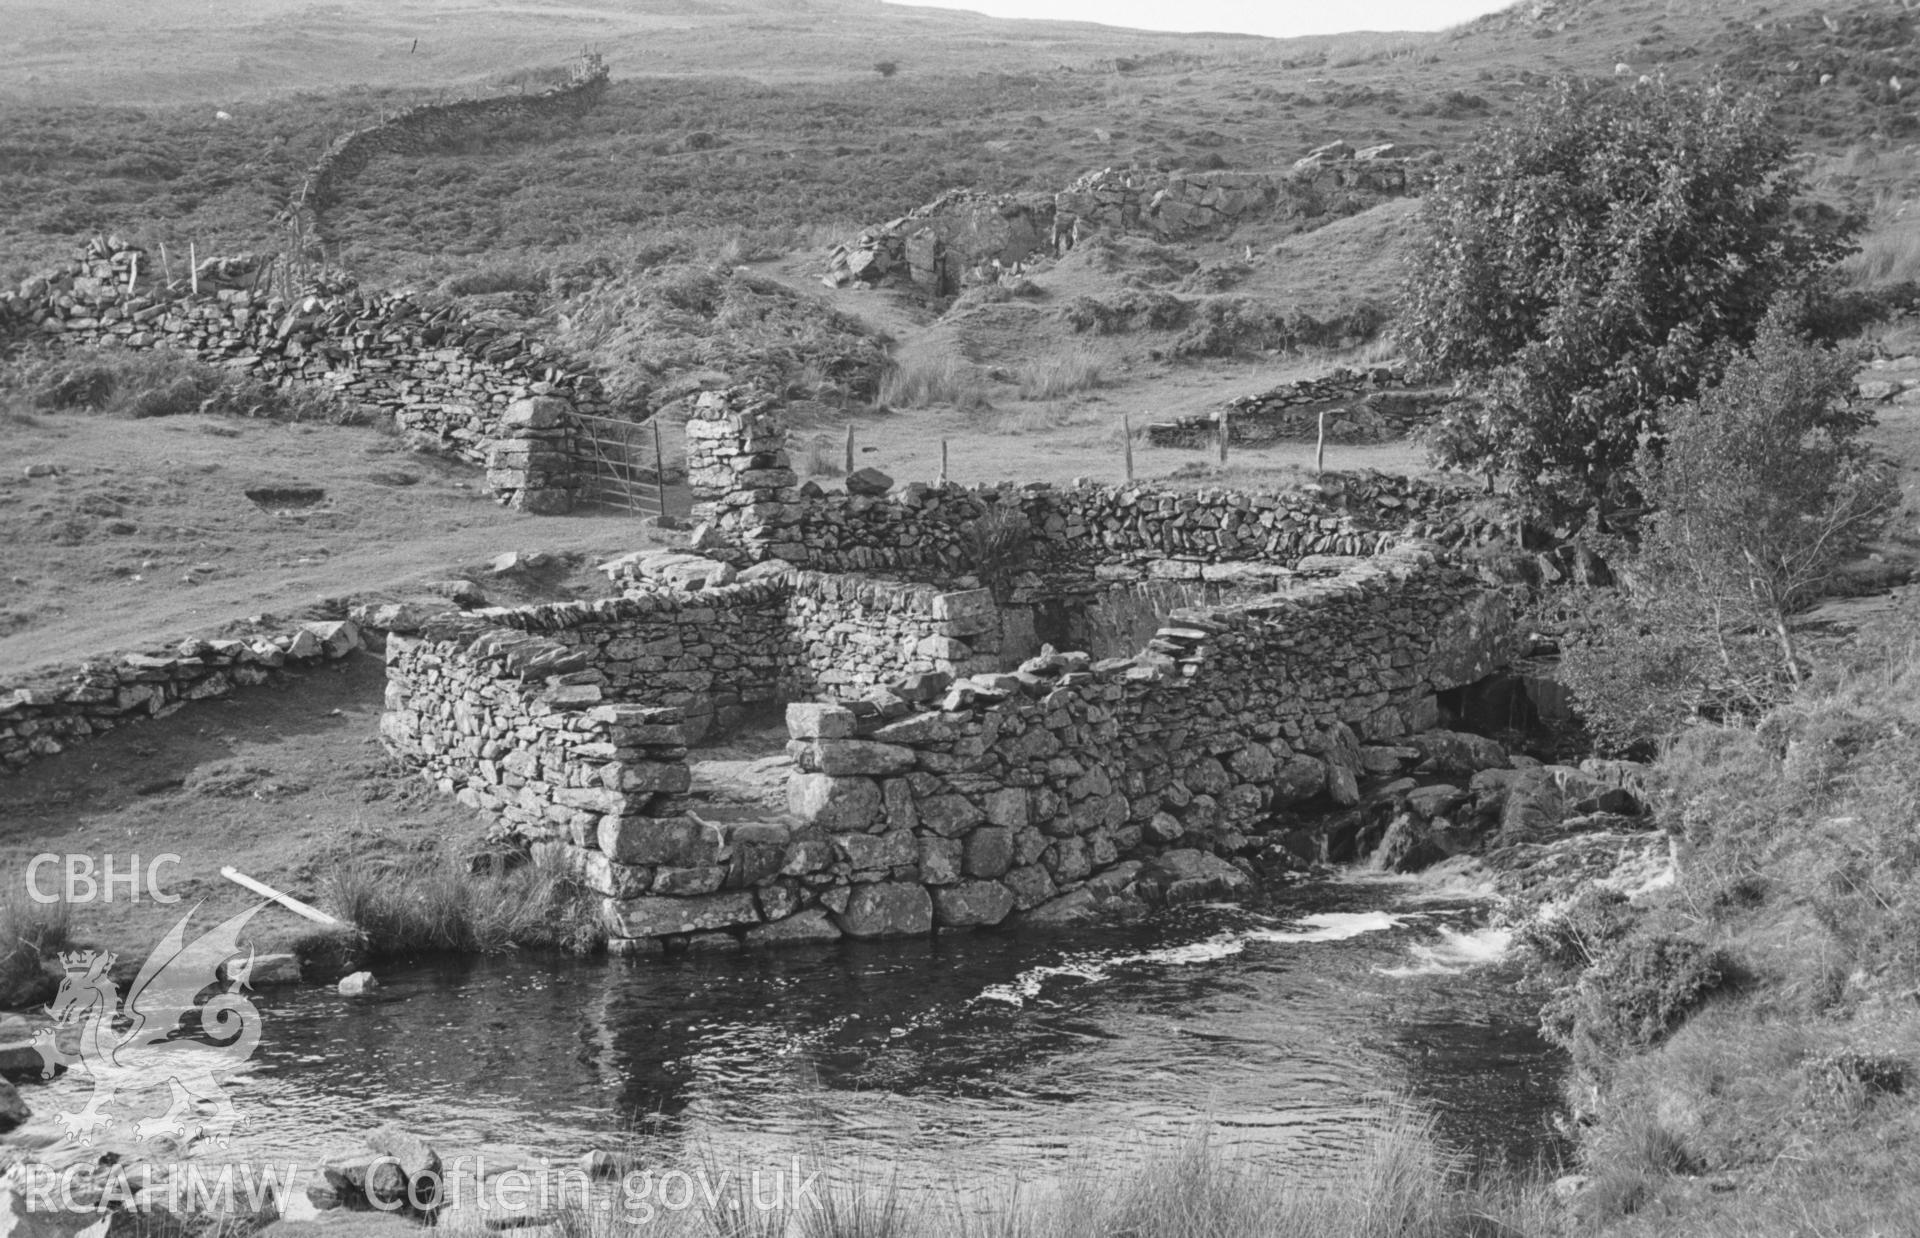 Digital copy of a black and white negative showing stone sheepfolds in Cwm Bychan. Photographed in August 1963 by Arthur O. Chater.